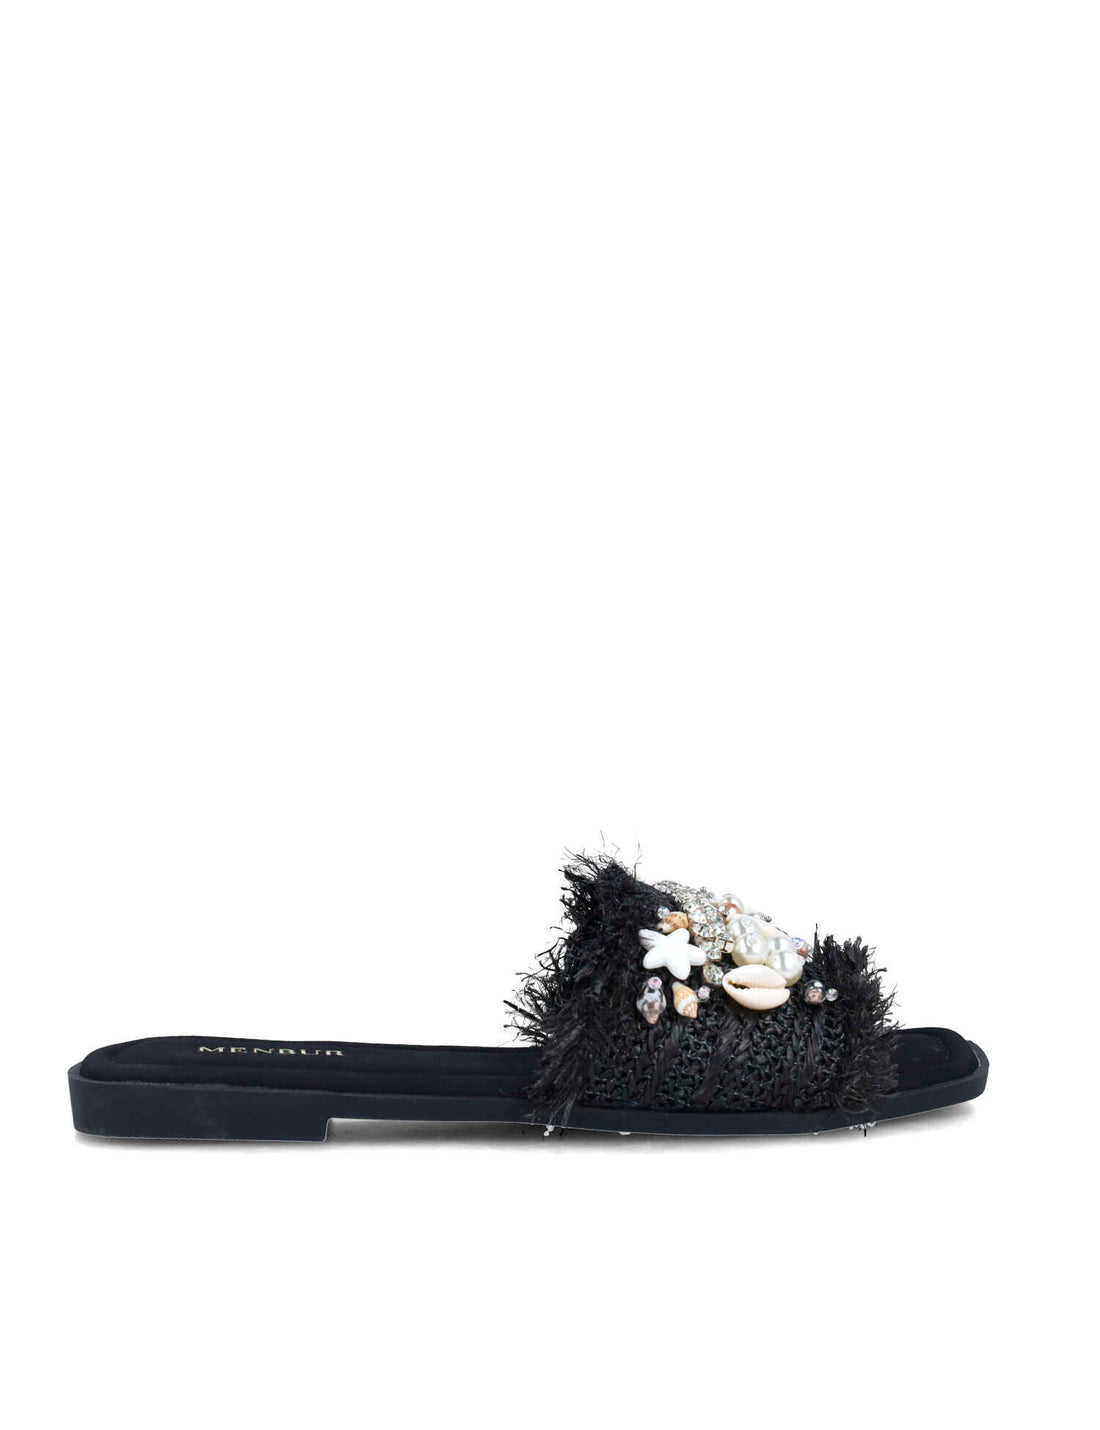 Black Slippers With Embellishments_25386_01_01